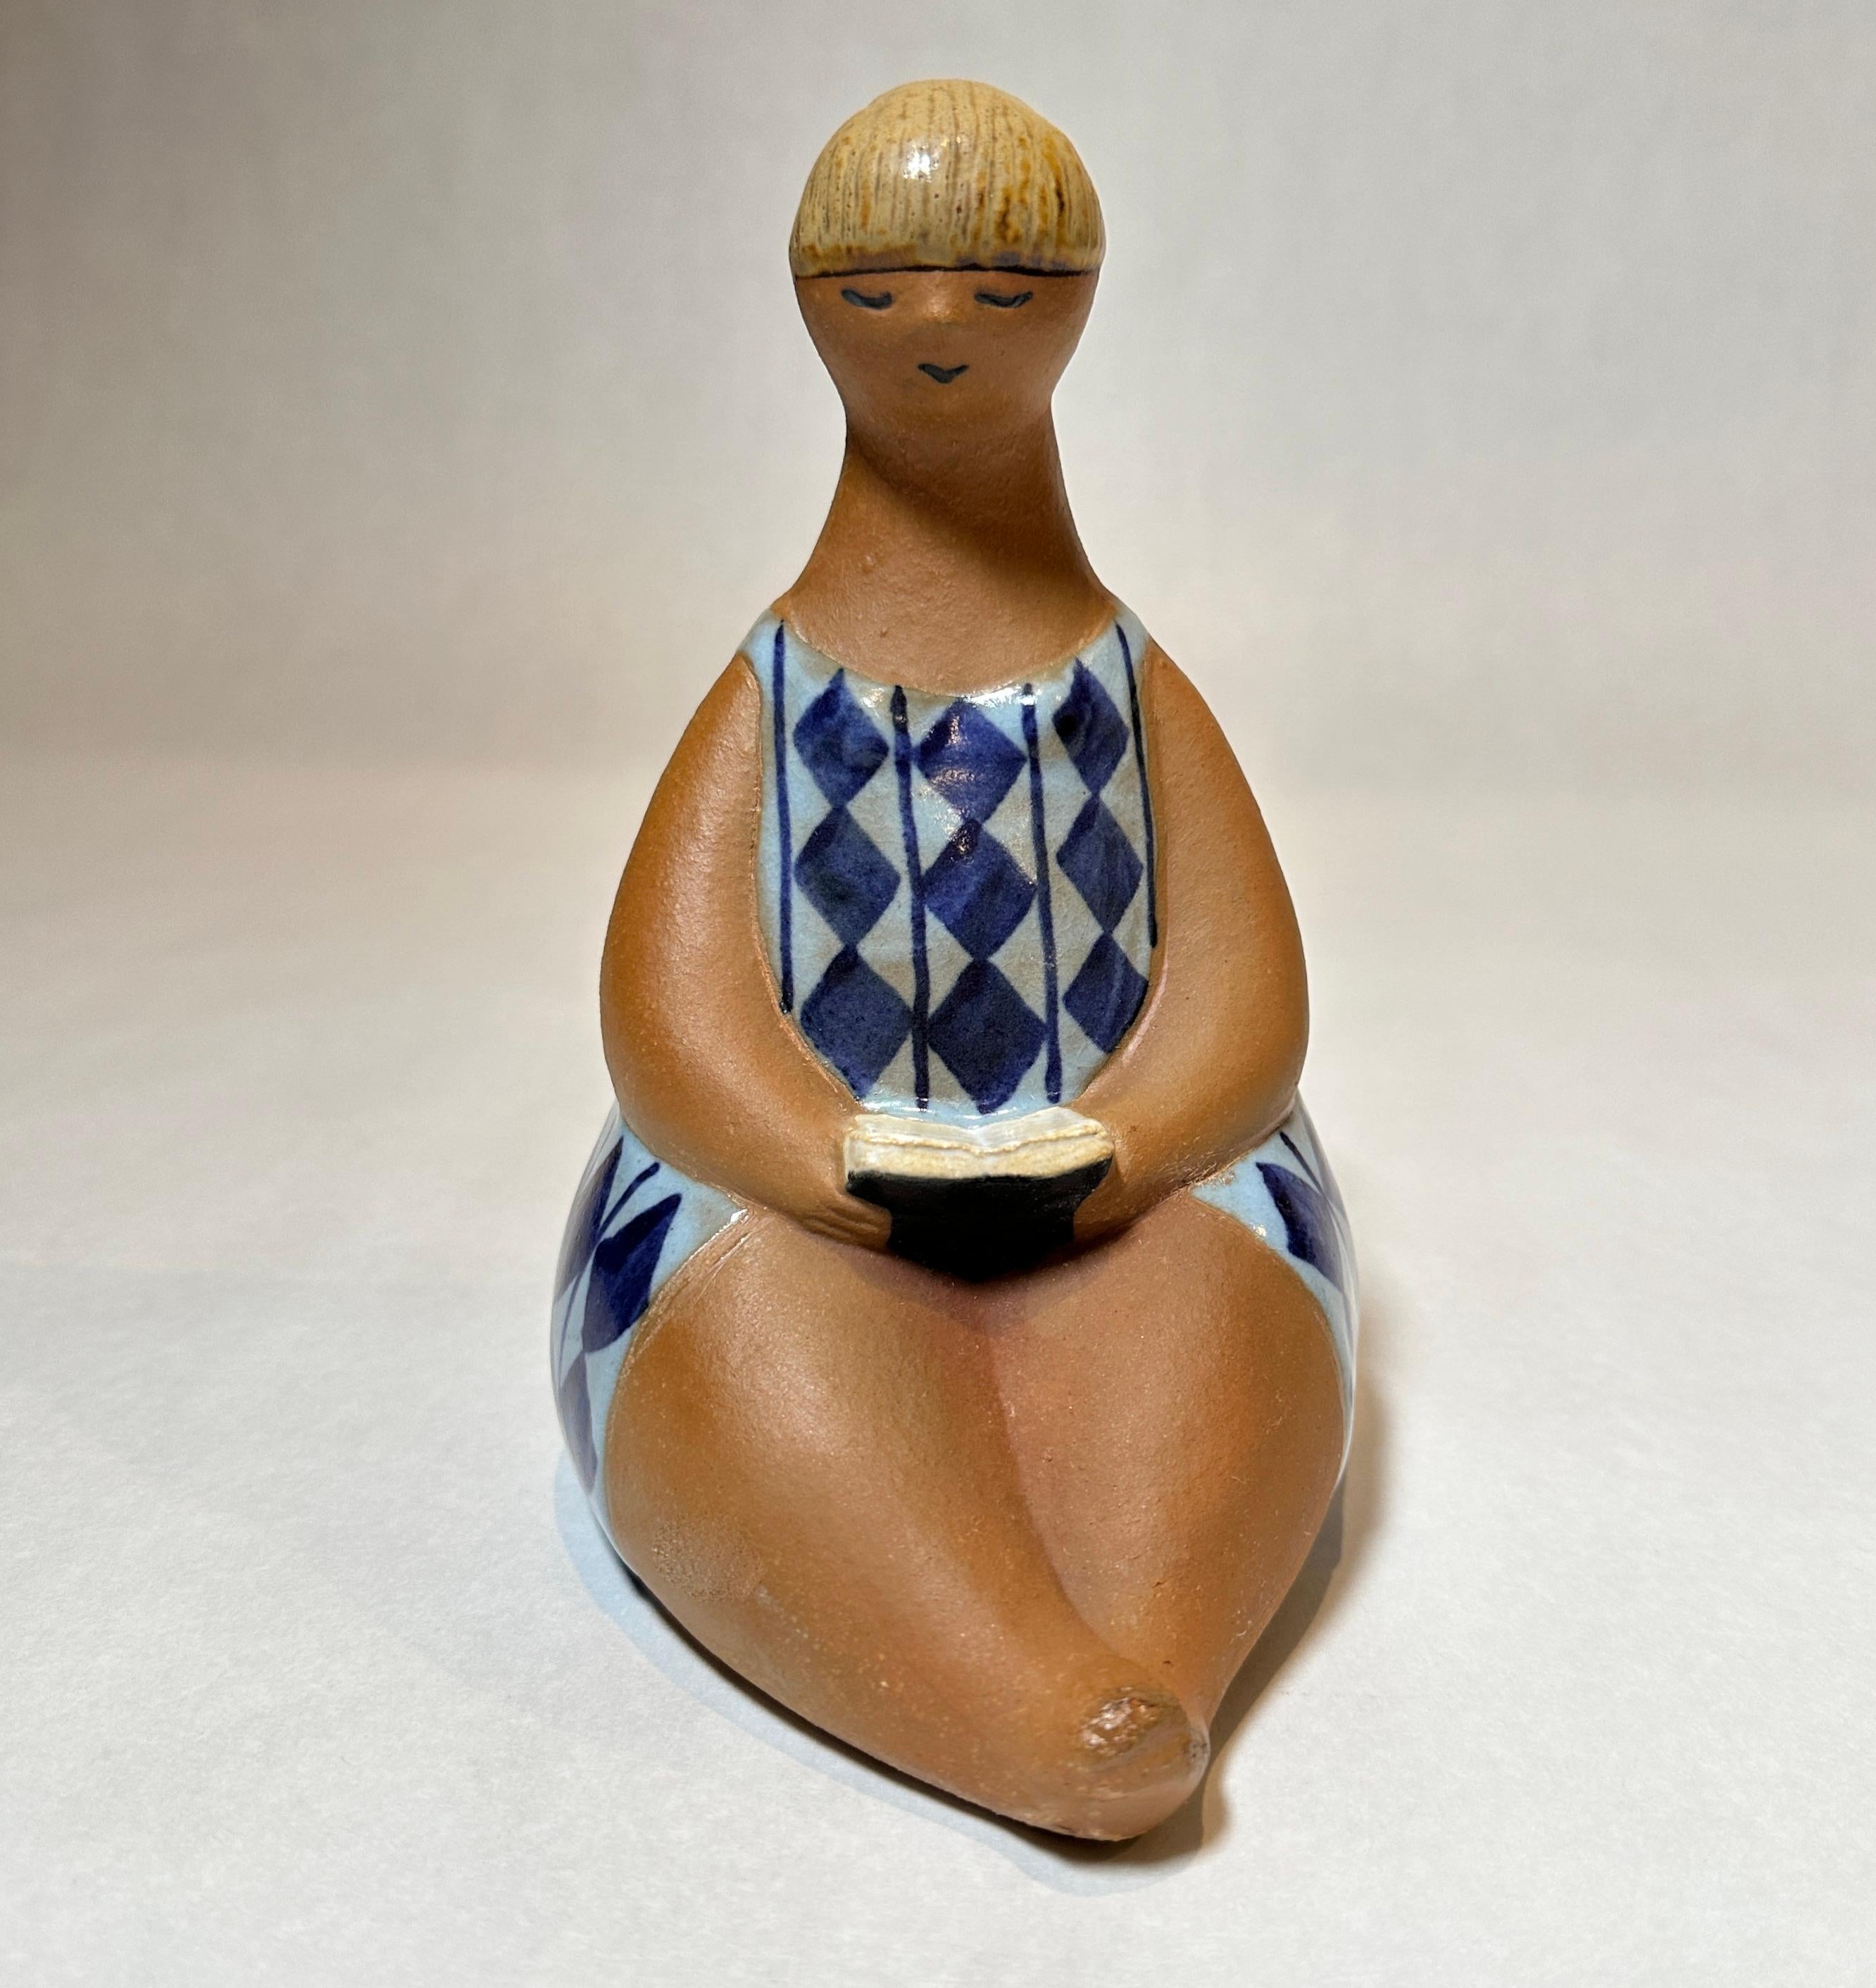 Beautiful Lisa Larson AMELIA Figurine from the ABC Girls series. Amelia in a blue summer dress. ABC Flickor Design by Lisa Larson for Gustavsberg 1970s Collectible Mid Century Modern stoneware
So charming - A perfect Rustic handmade piece. Would